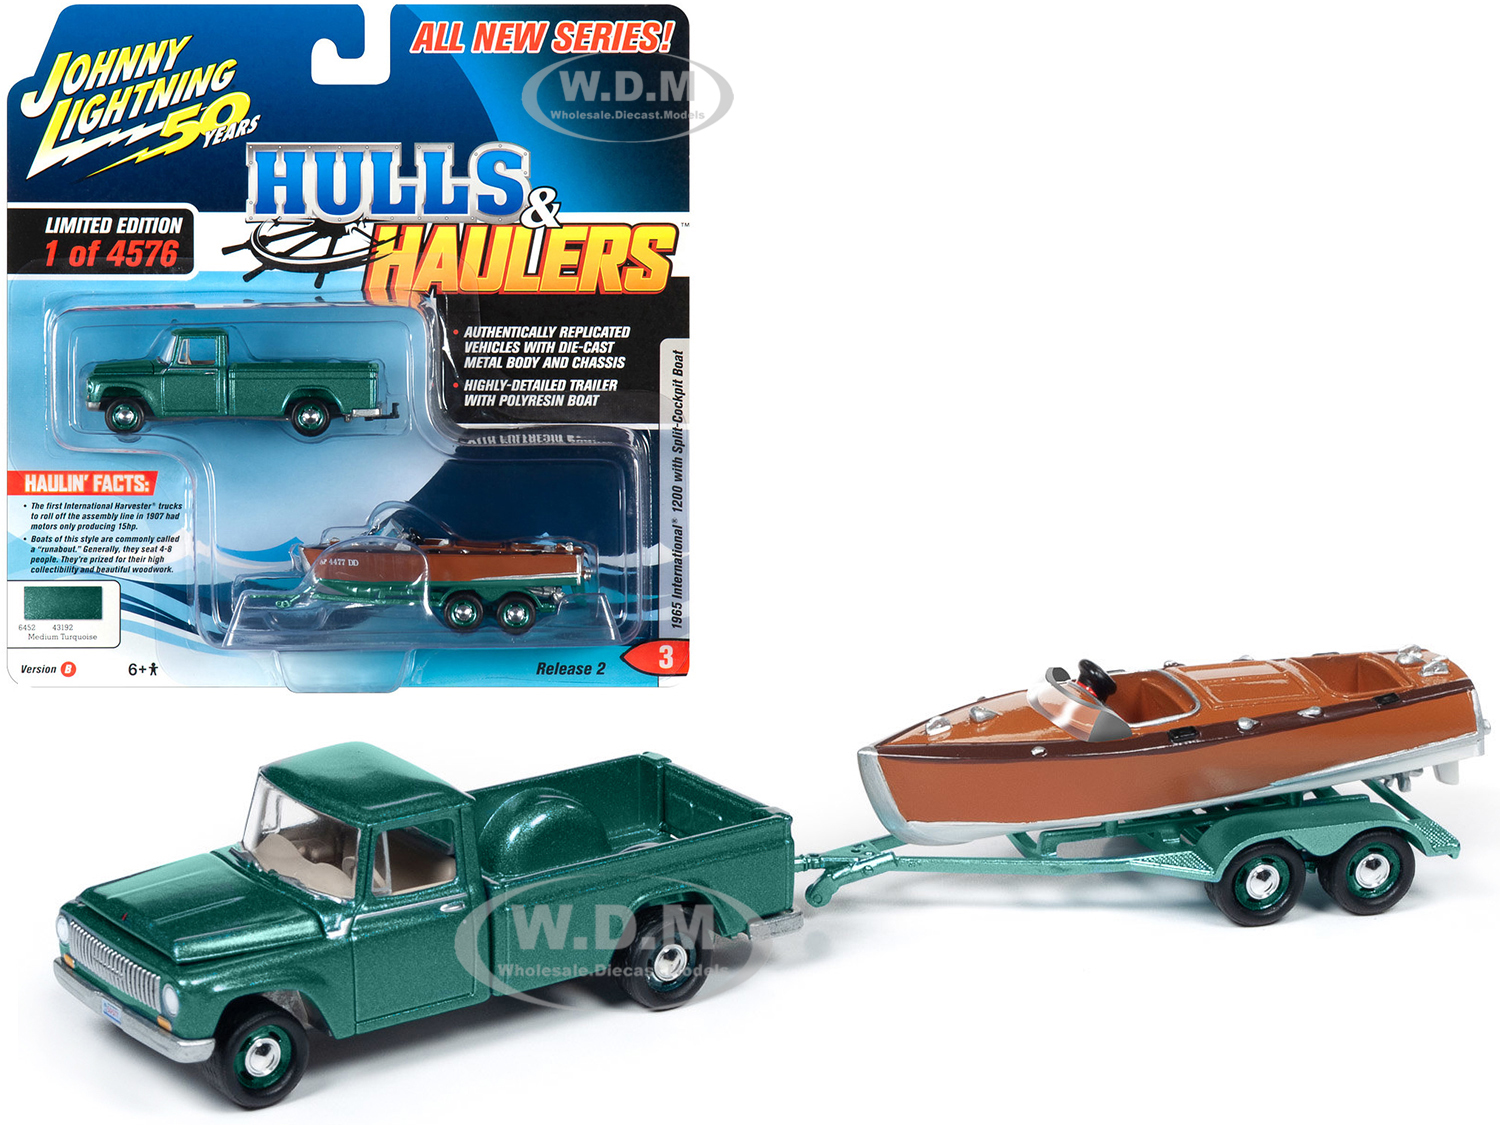 1965 International 1200 Pickup Truck Medium Turquoise Metallic With Split-cockpit Boat Limited Edition To 4576 Pieces Worldwide "hulls & Haulers"